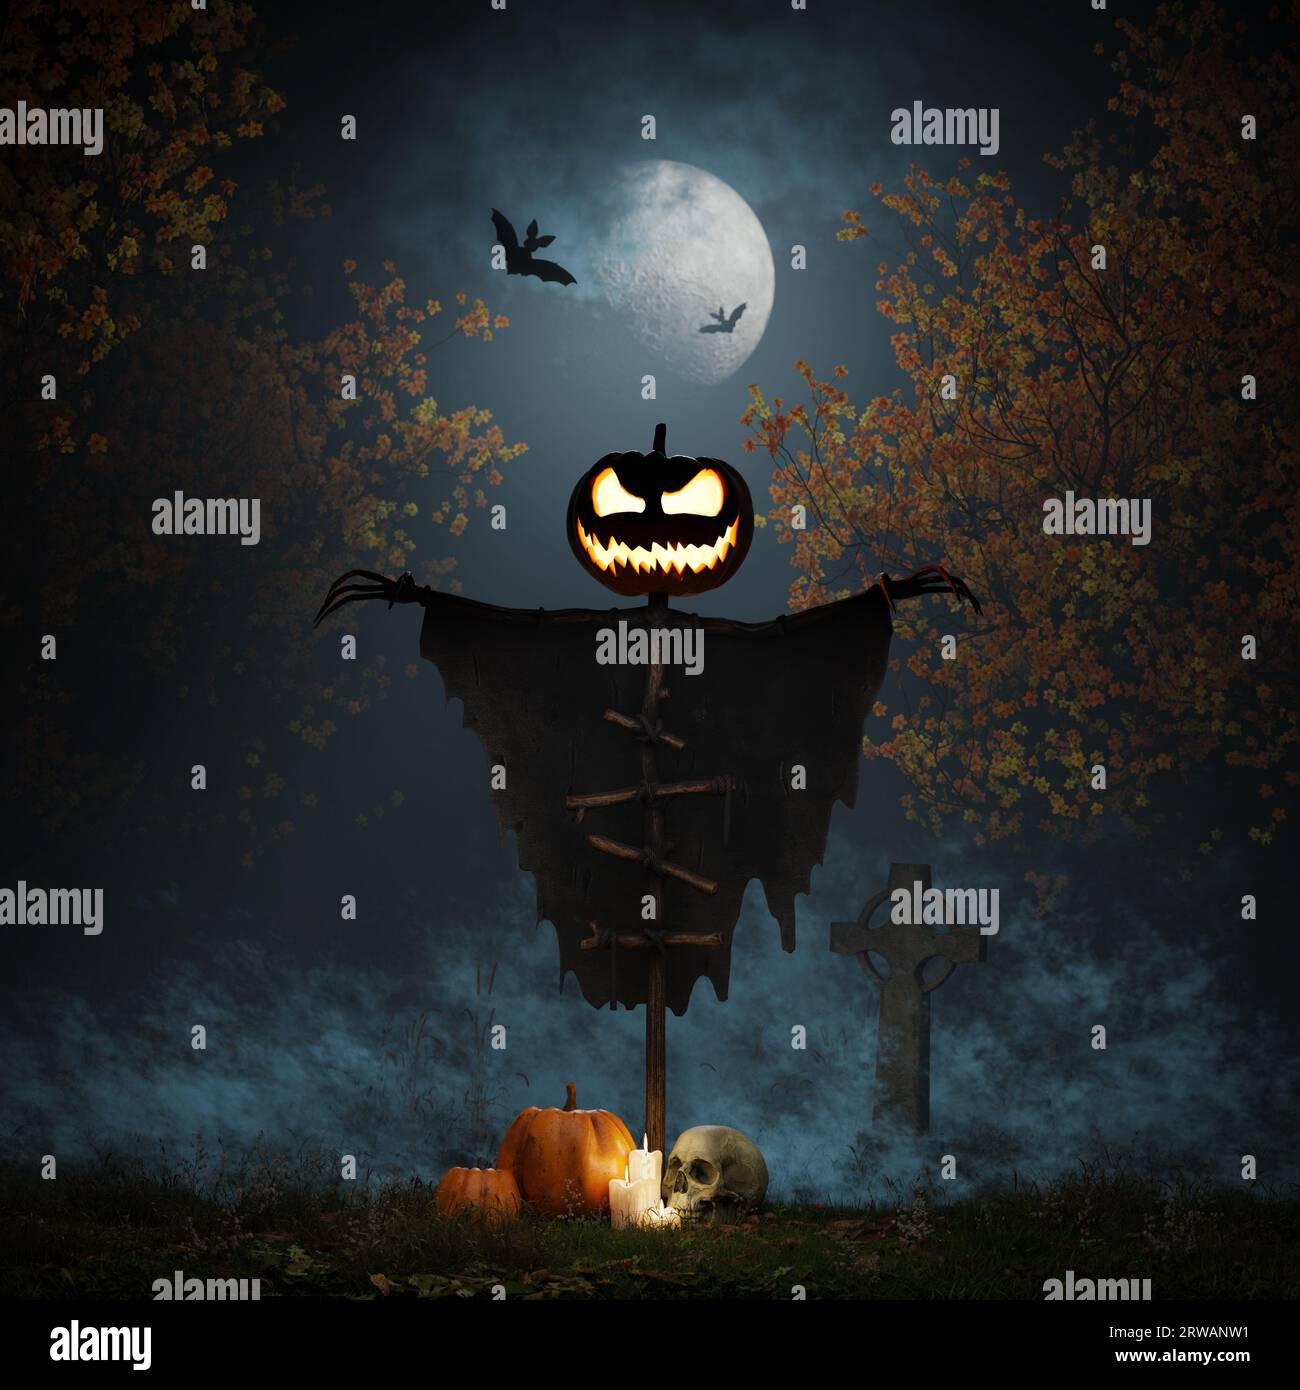 Halloween scarecrow with pumpkin head and glowing eyes in the cemetery at night. Pumpkins, candles and a skull. 3d render Stock Photo